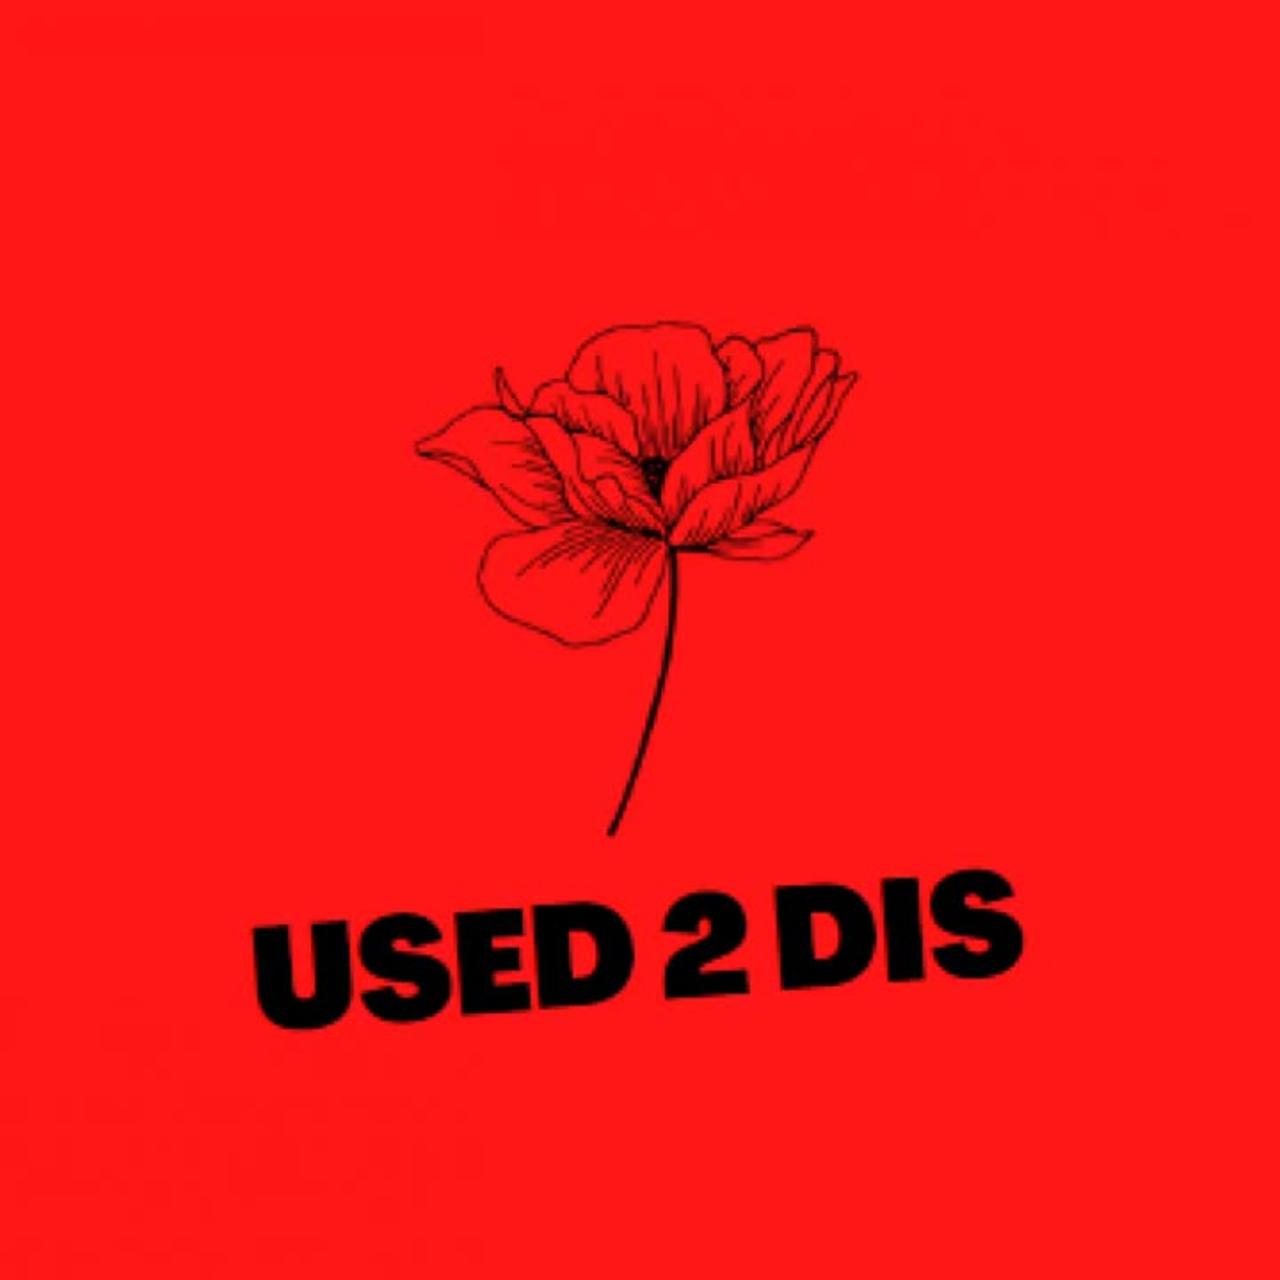 John Lewis - Used 2 Dis (feat. Ceobill) (Official Audio)